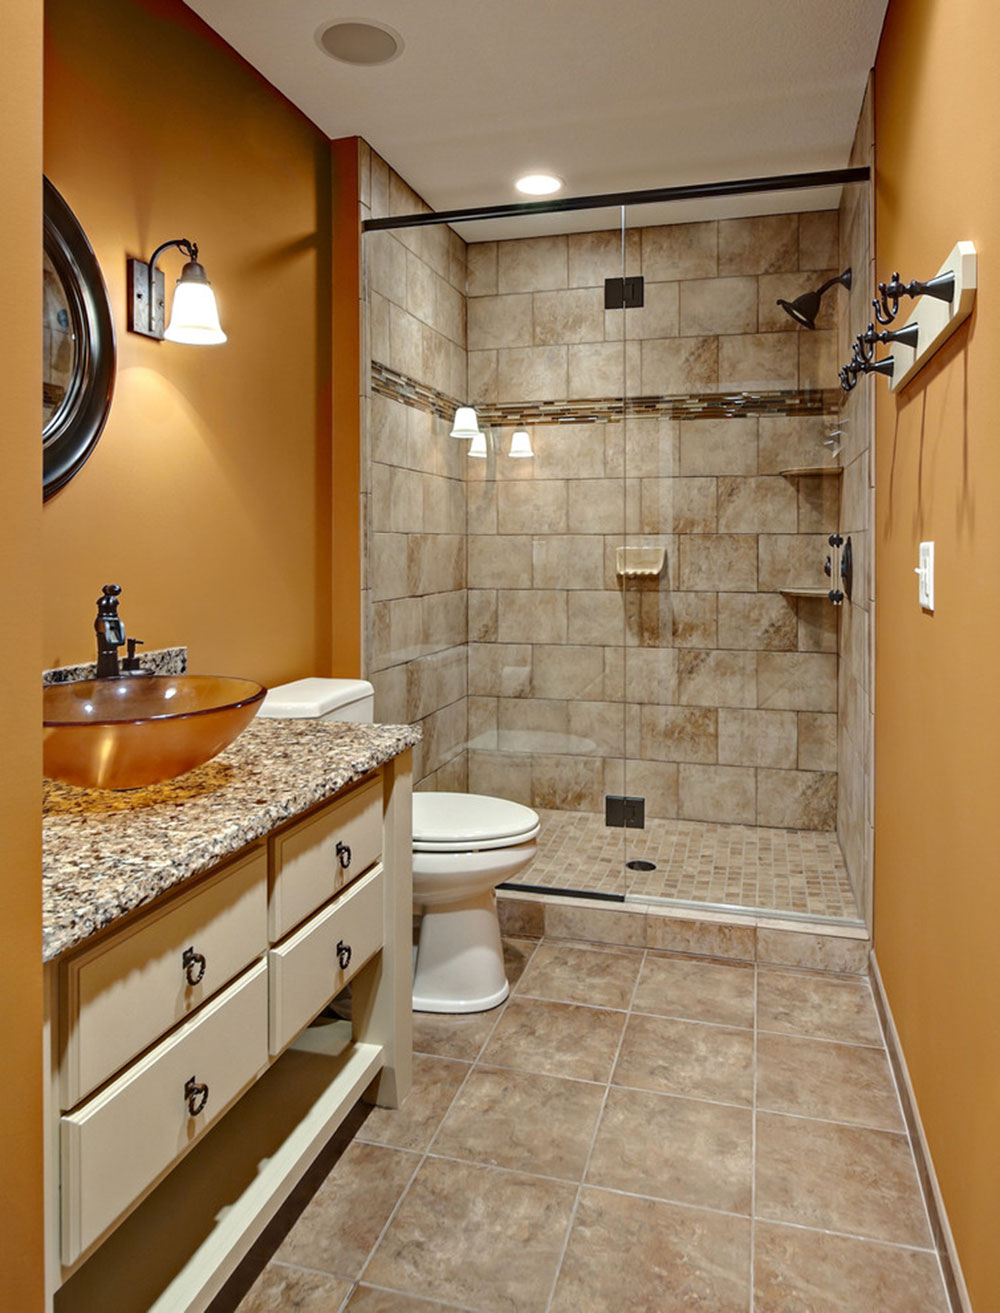 How Much Does It Cost To Add A Bathroom In The Basement Answered - How Much Value Does A Basement Bathroom Add